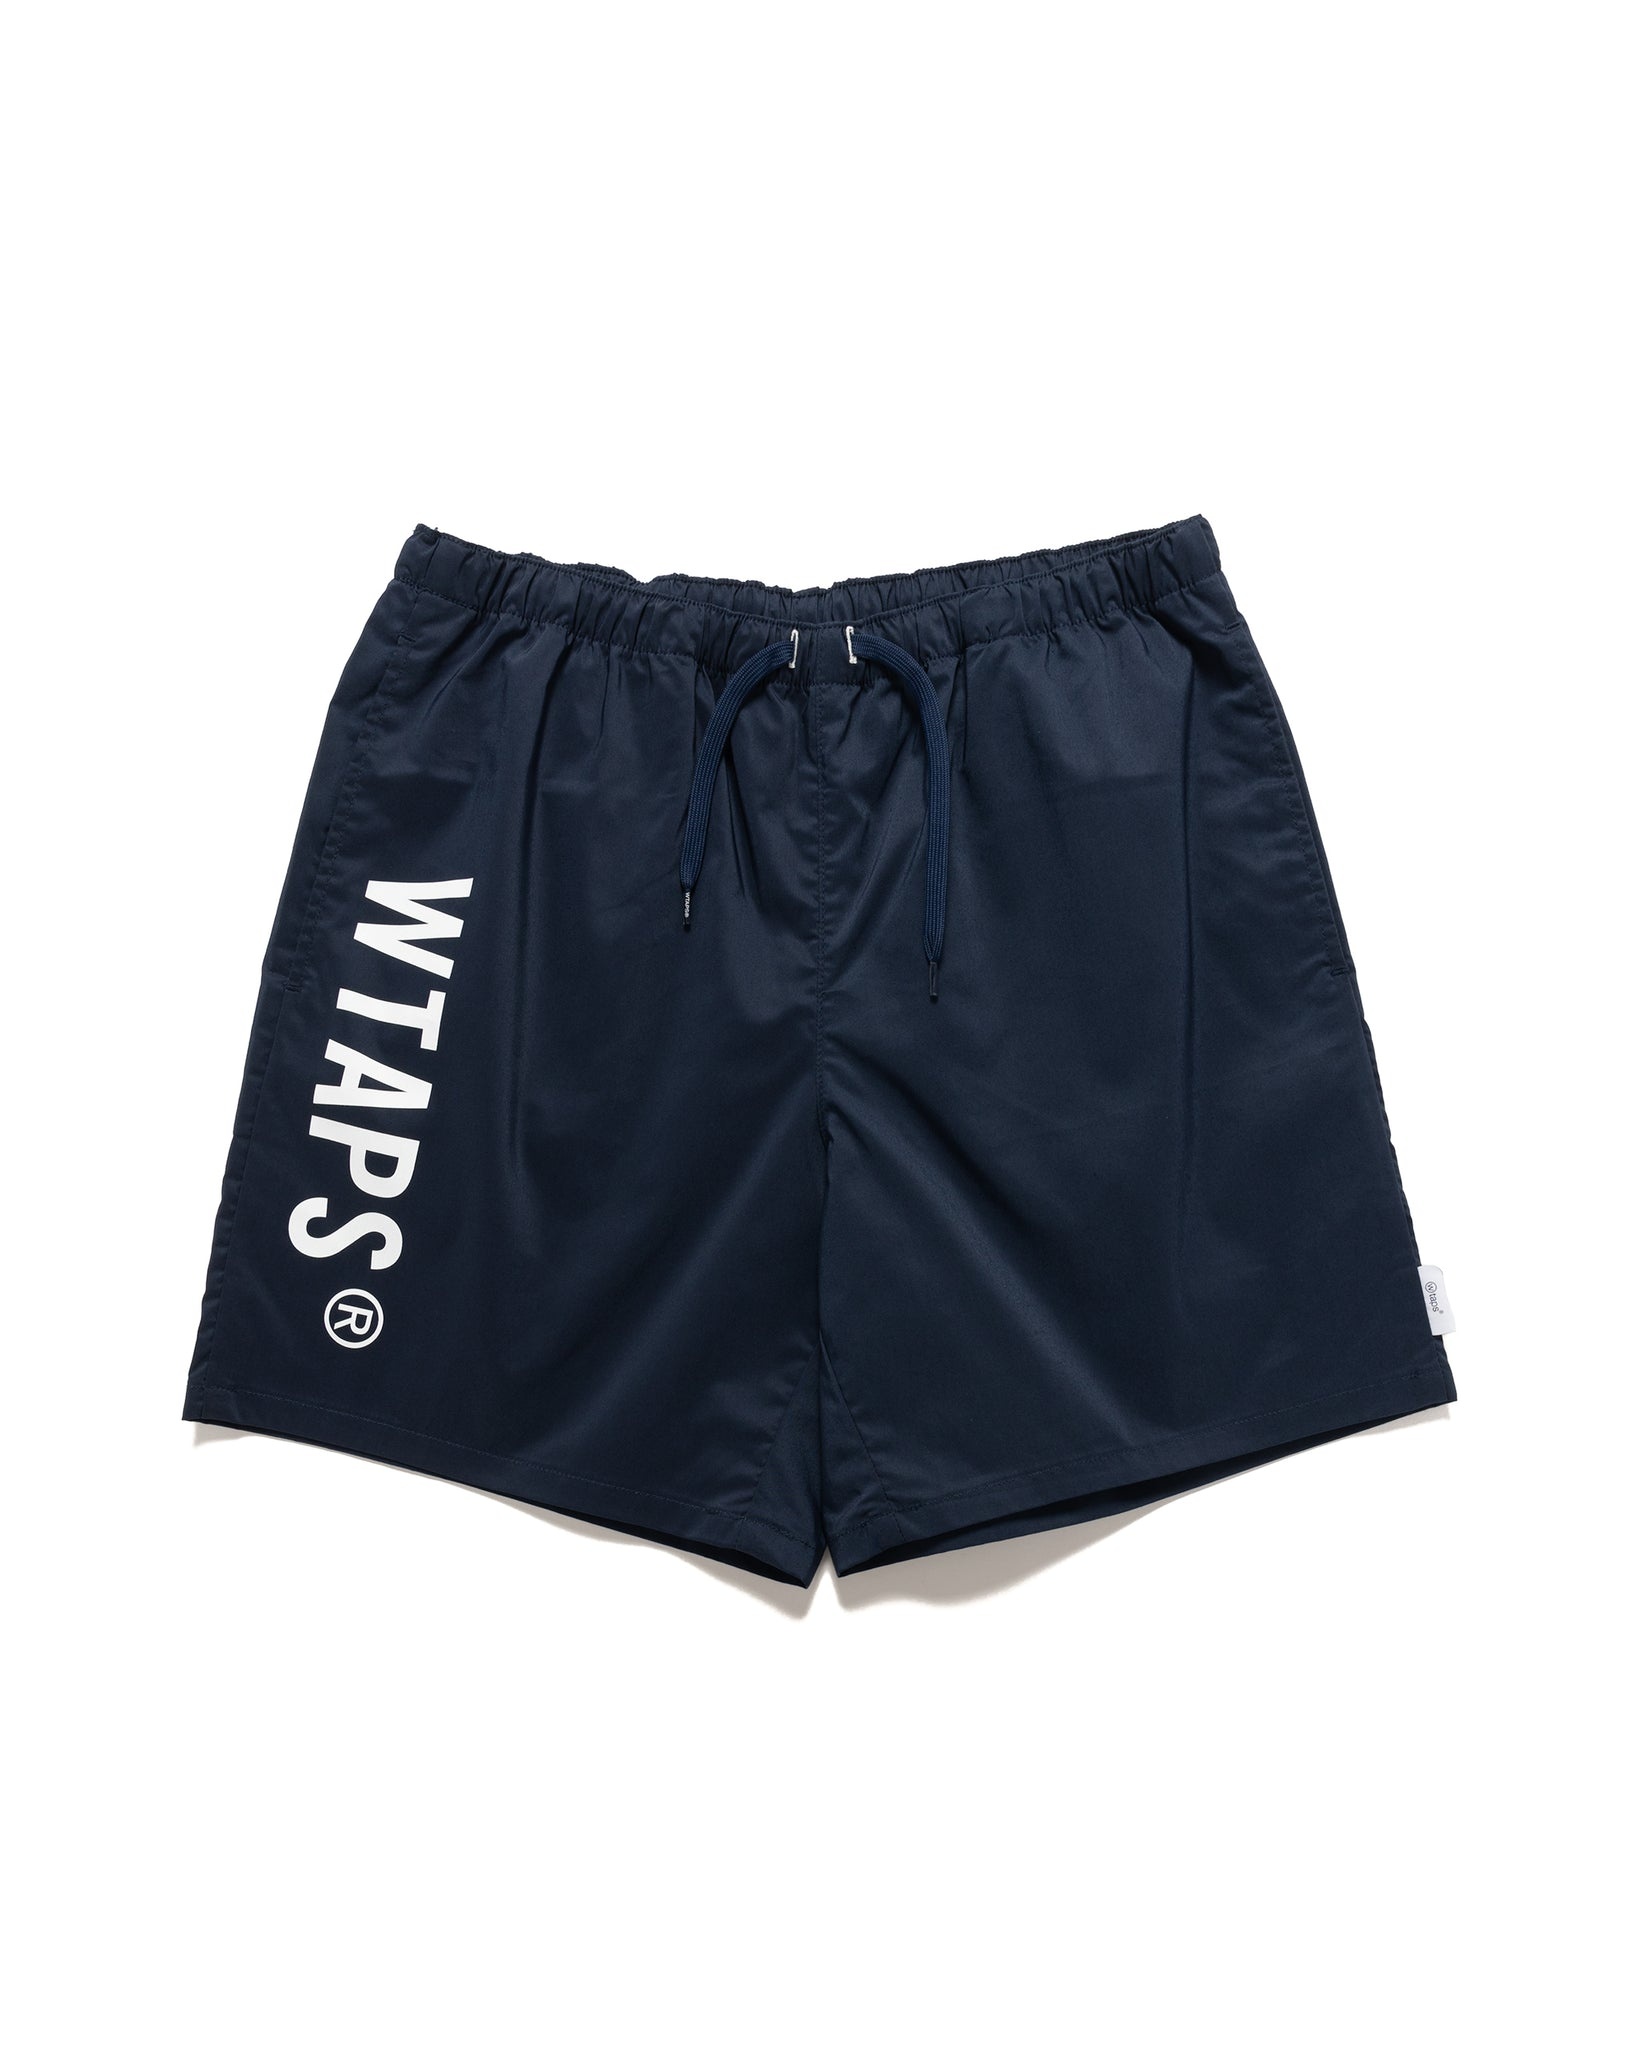 WTAPS SPSS2002 / Shorts / CTPL. Weather. Sign Navy | havenshop | REVERSIBLE